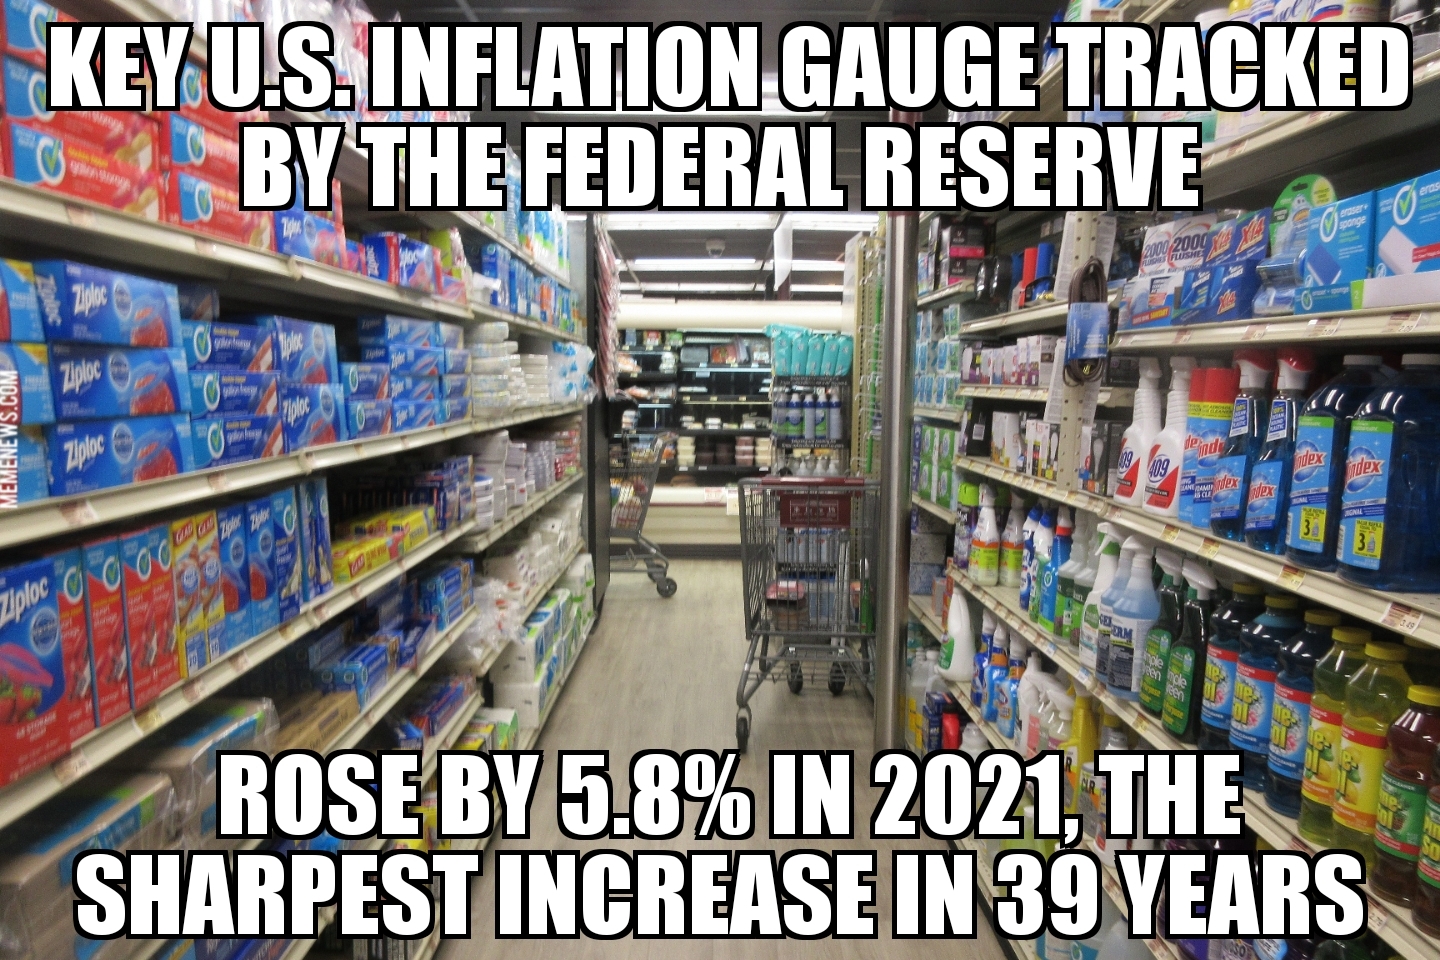 U.S. inflation up in 2021